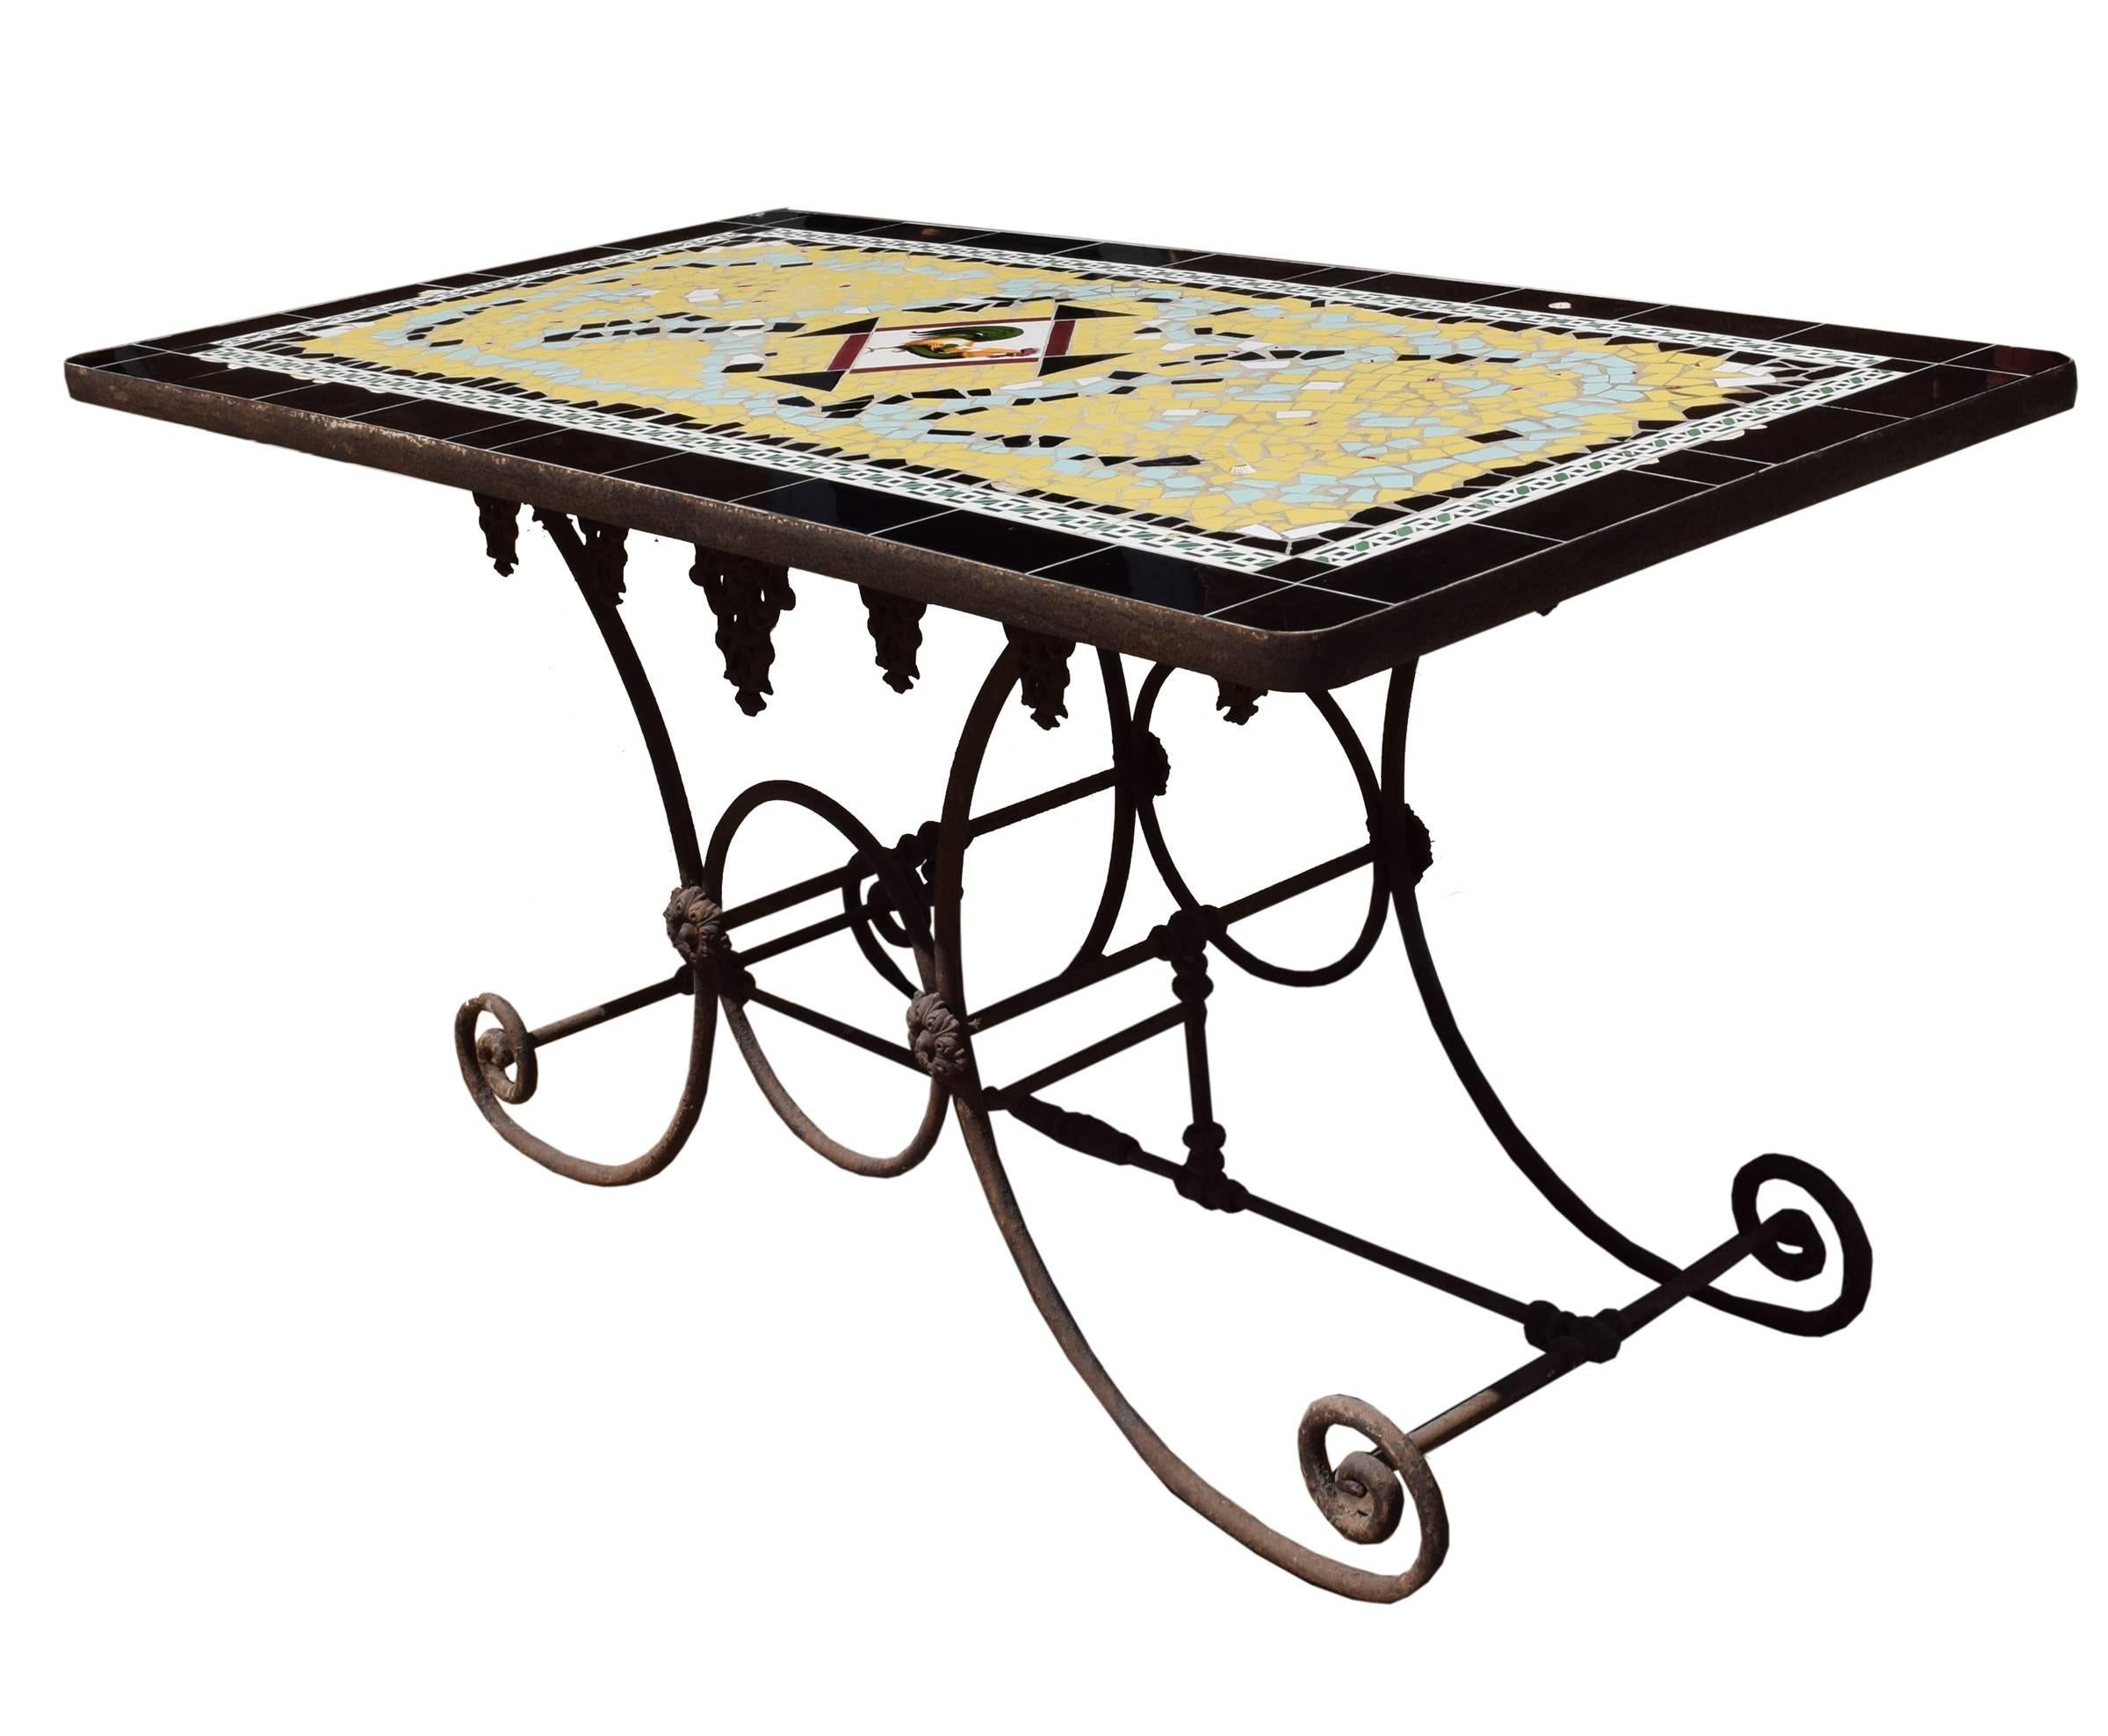 A 19th century French iron baker's table base with a 20th century tile mosaic top featuring a rooster at the center.